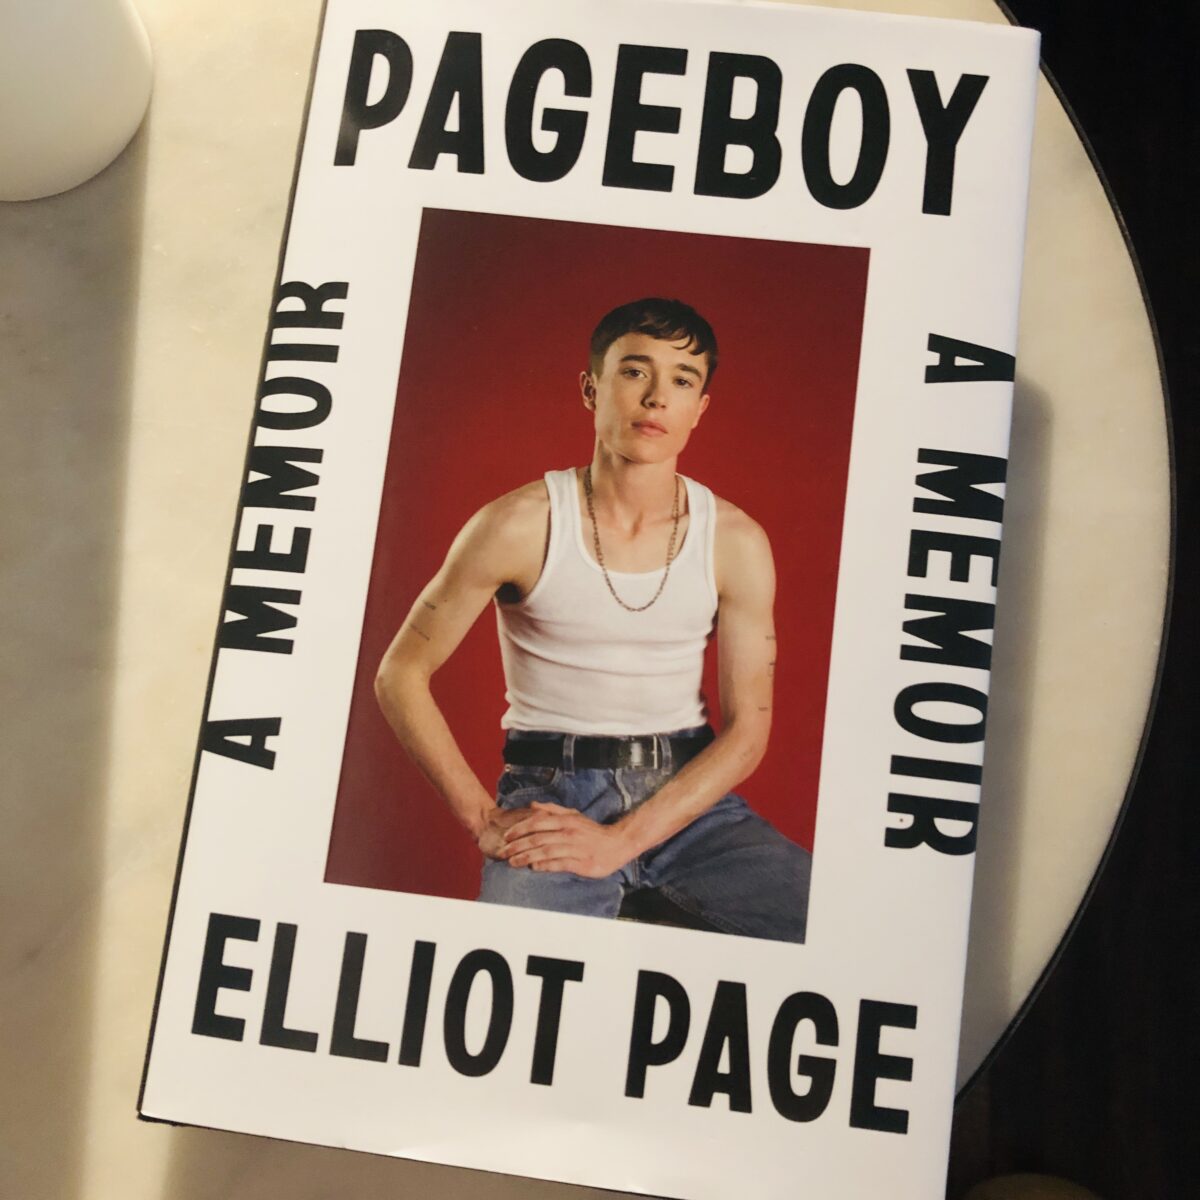 PAGEBOY book cover, Elliot Page. Photo by Raymond Helkio